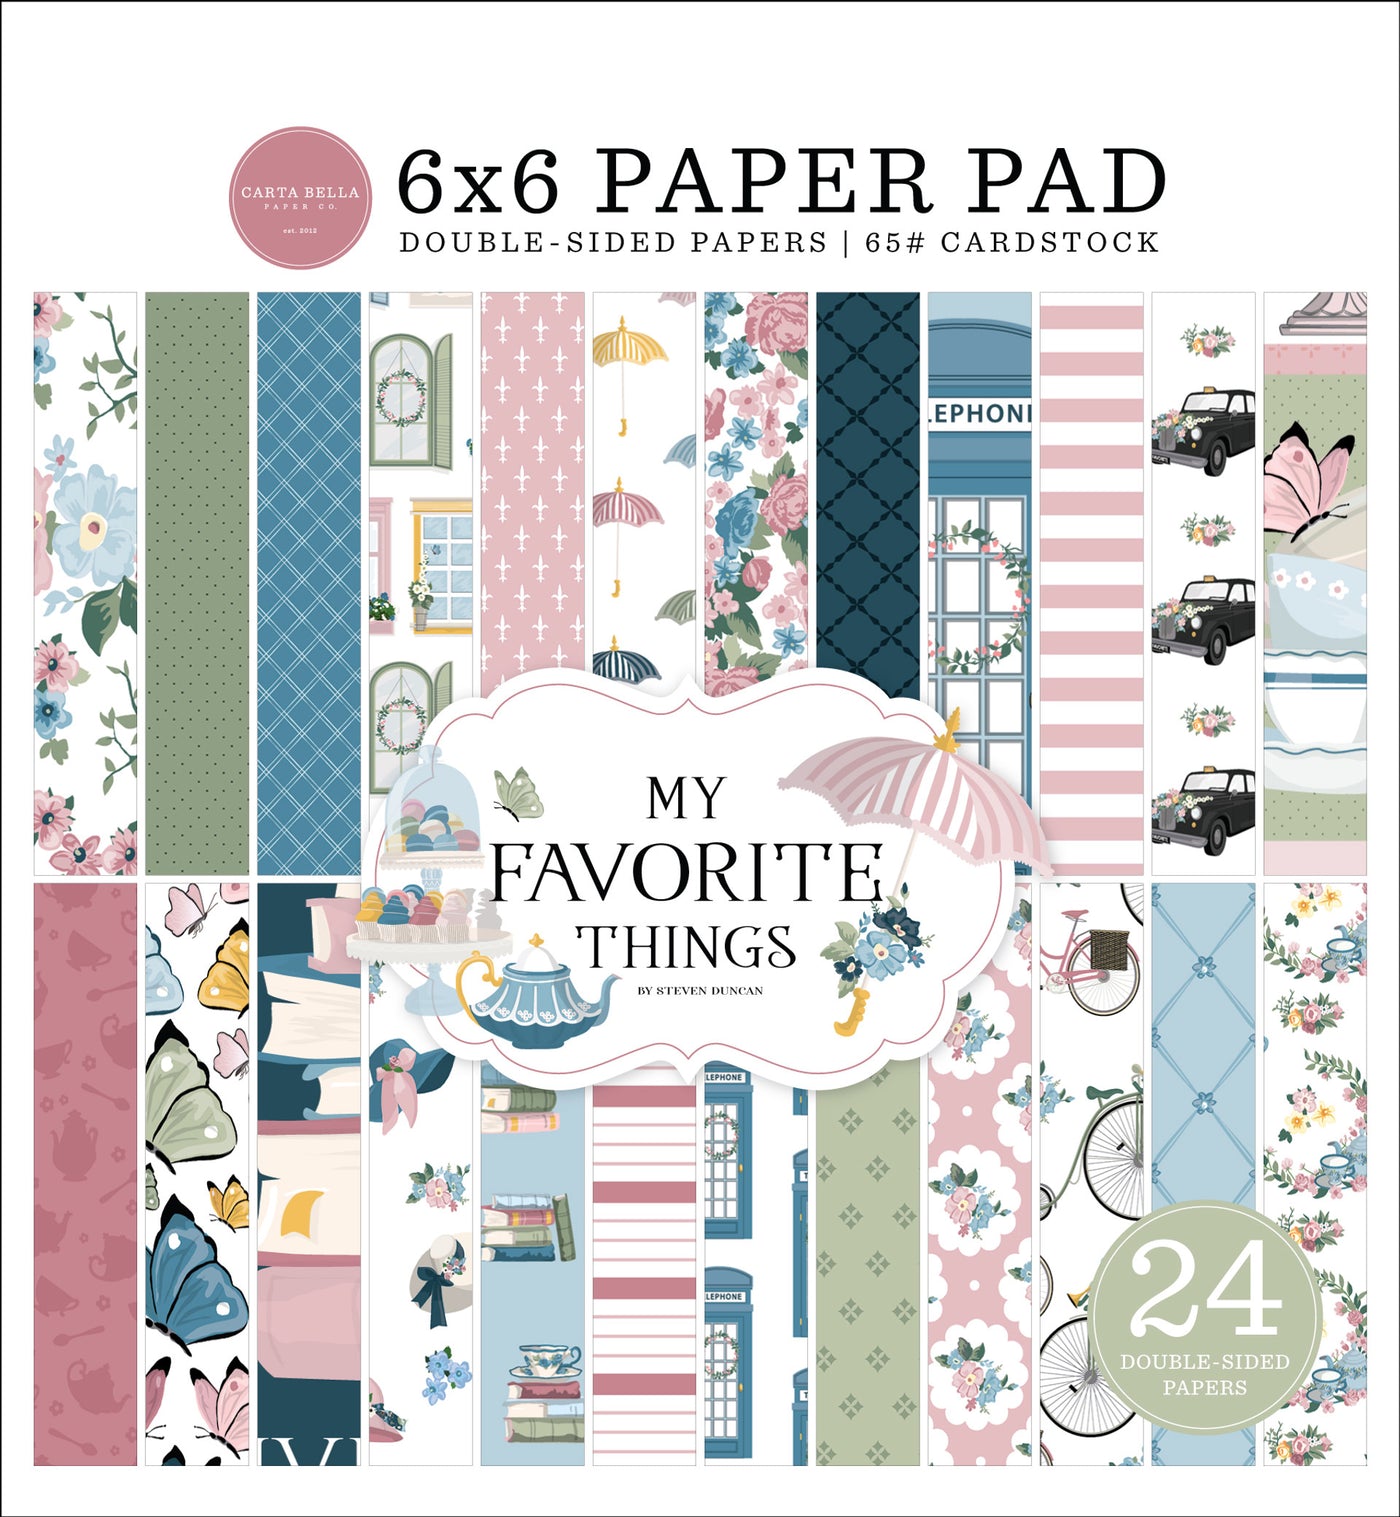 6x6 pad with 24 double-sided sheets. Scaled-down images are great for card making and similar crafts. This pad features beautiful vintage prints in pastel colors.